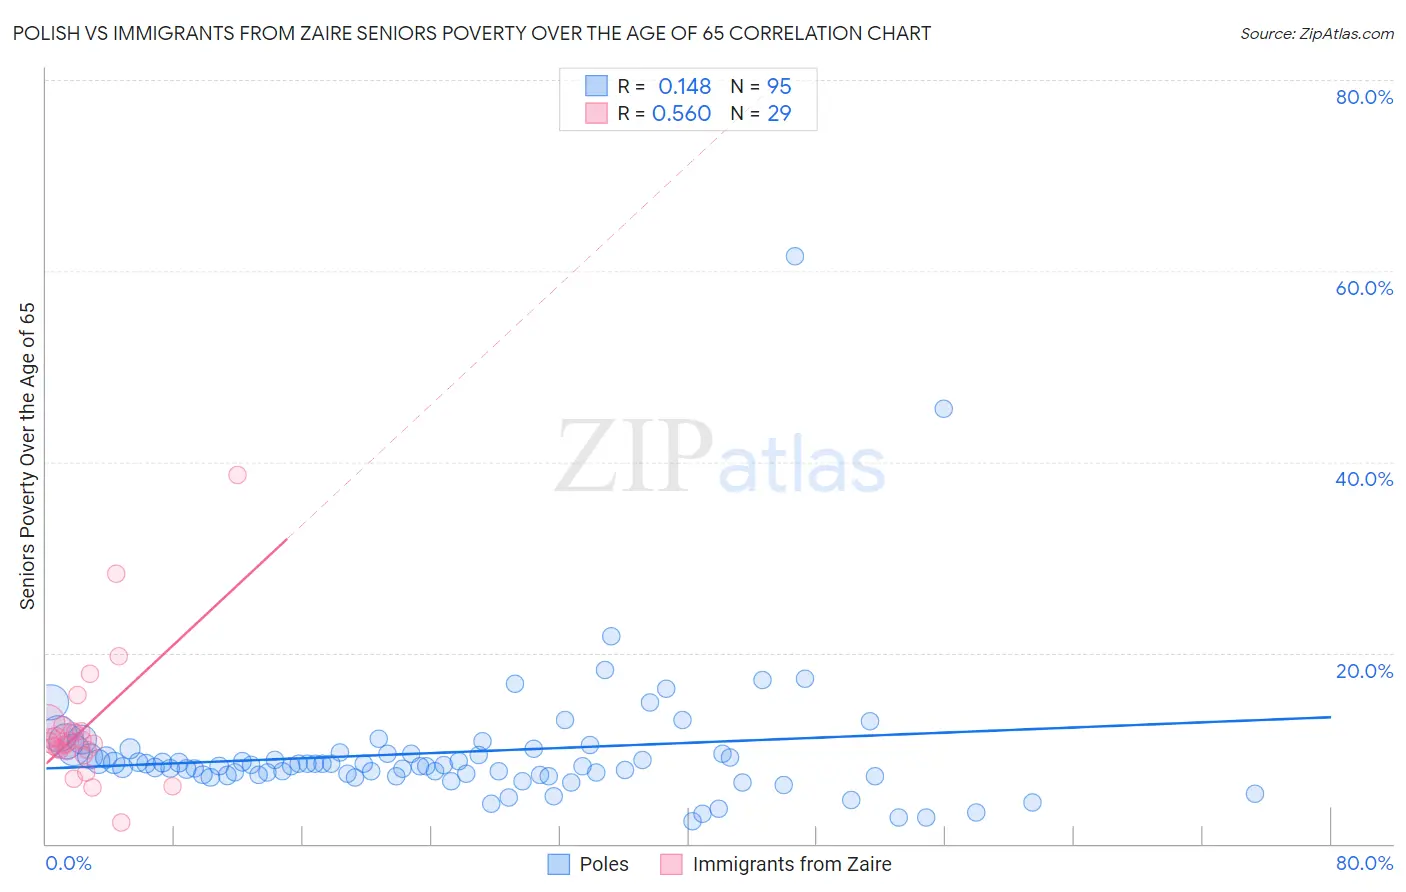 Polish vs Immigrants from Zaire Seniors Poverty Over the Age of 65